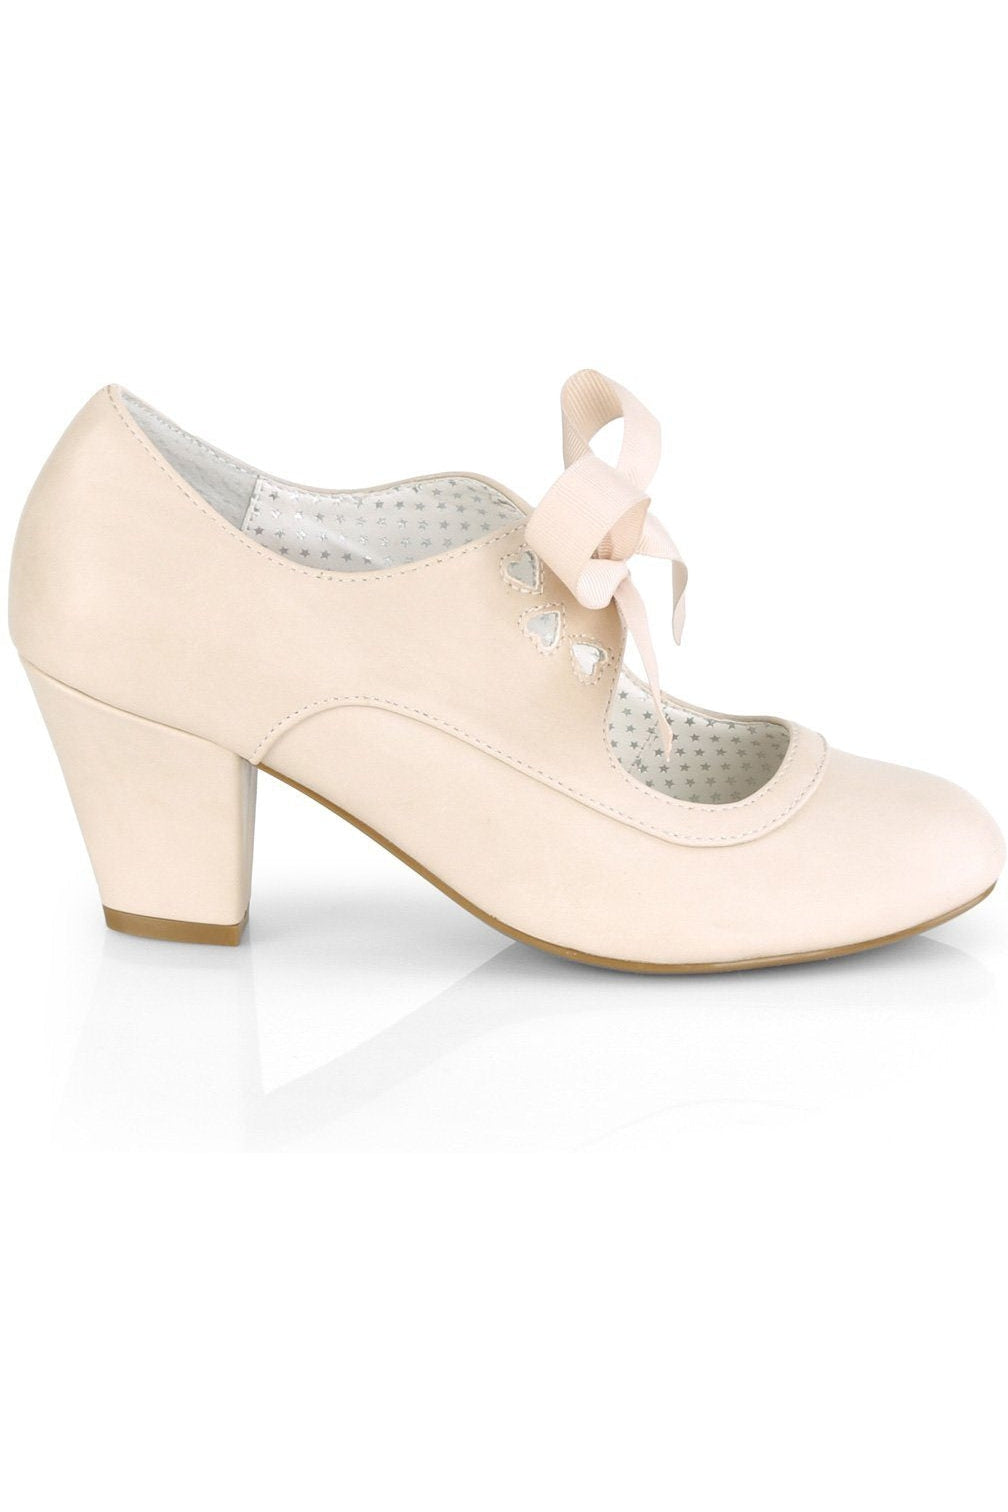 WIGGLE-32 Pump | Nude Faux Leather-Pumps-Pin Up Couture-SEXYSHOES.COM